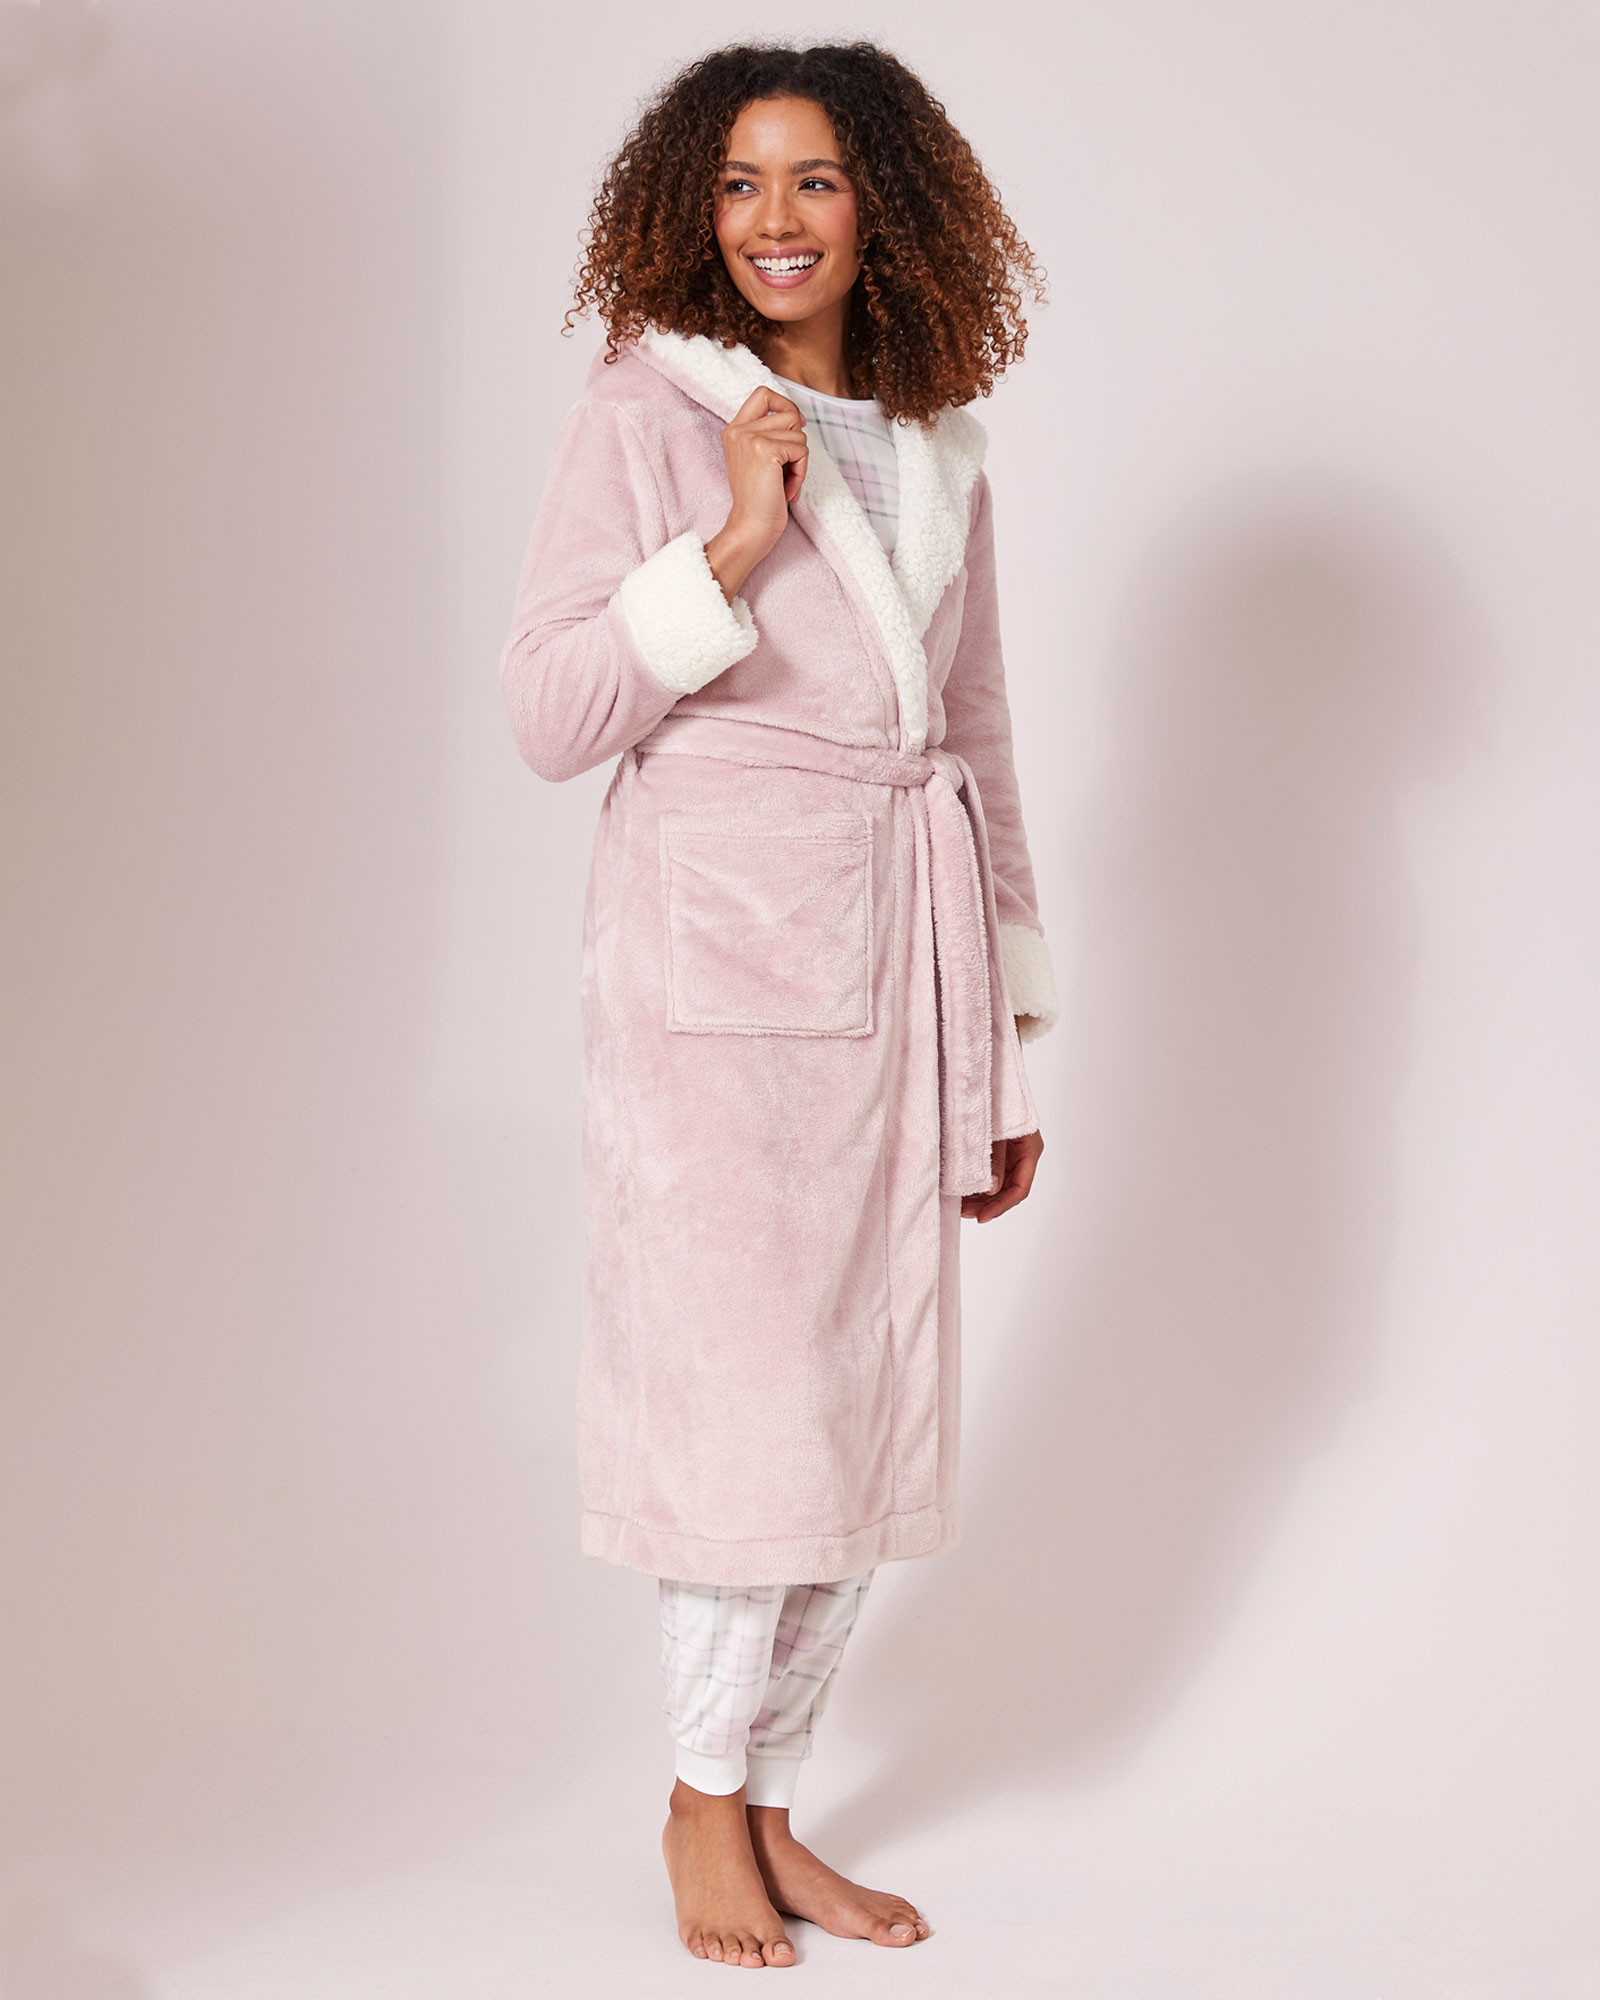 Arabella Dressing Gown Pink Rose – Add to Cart